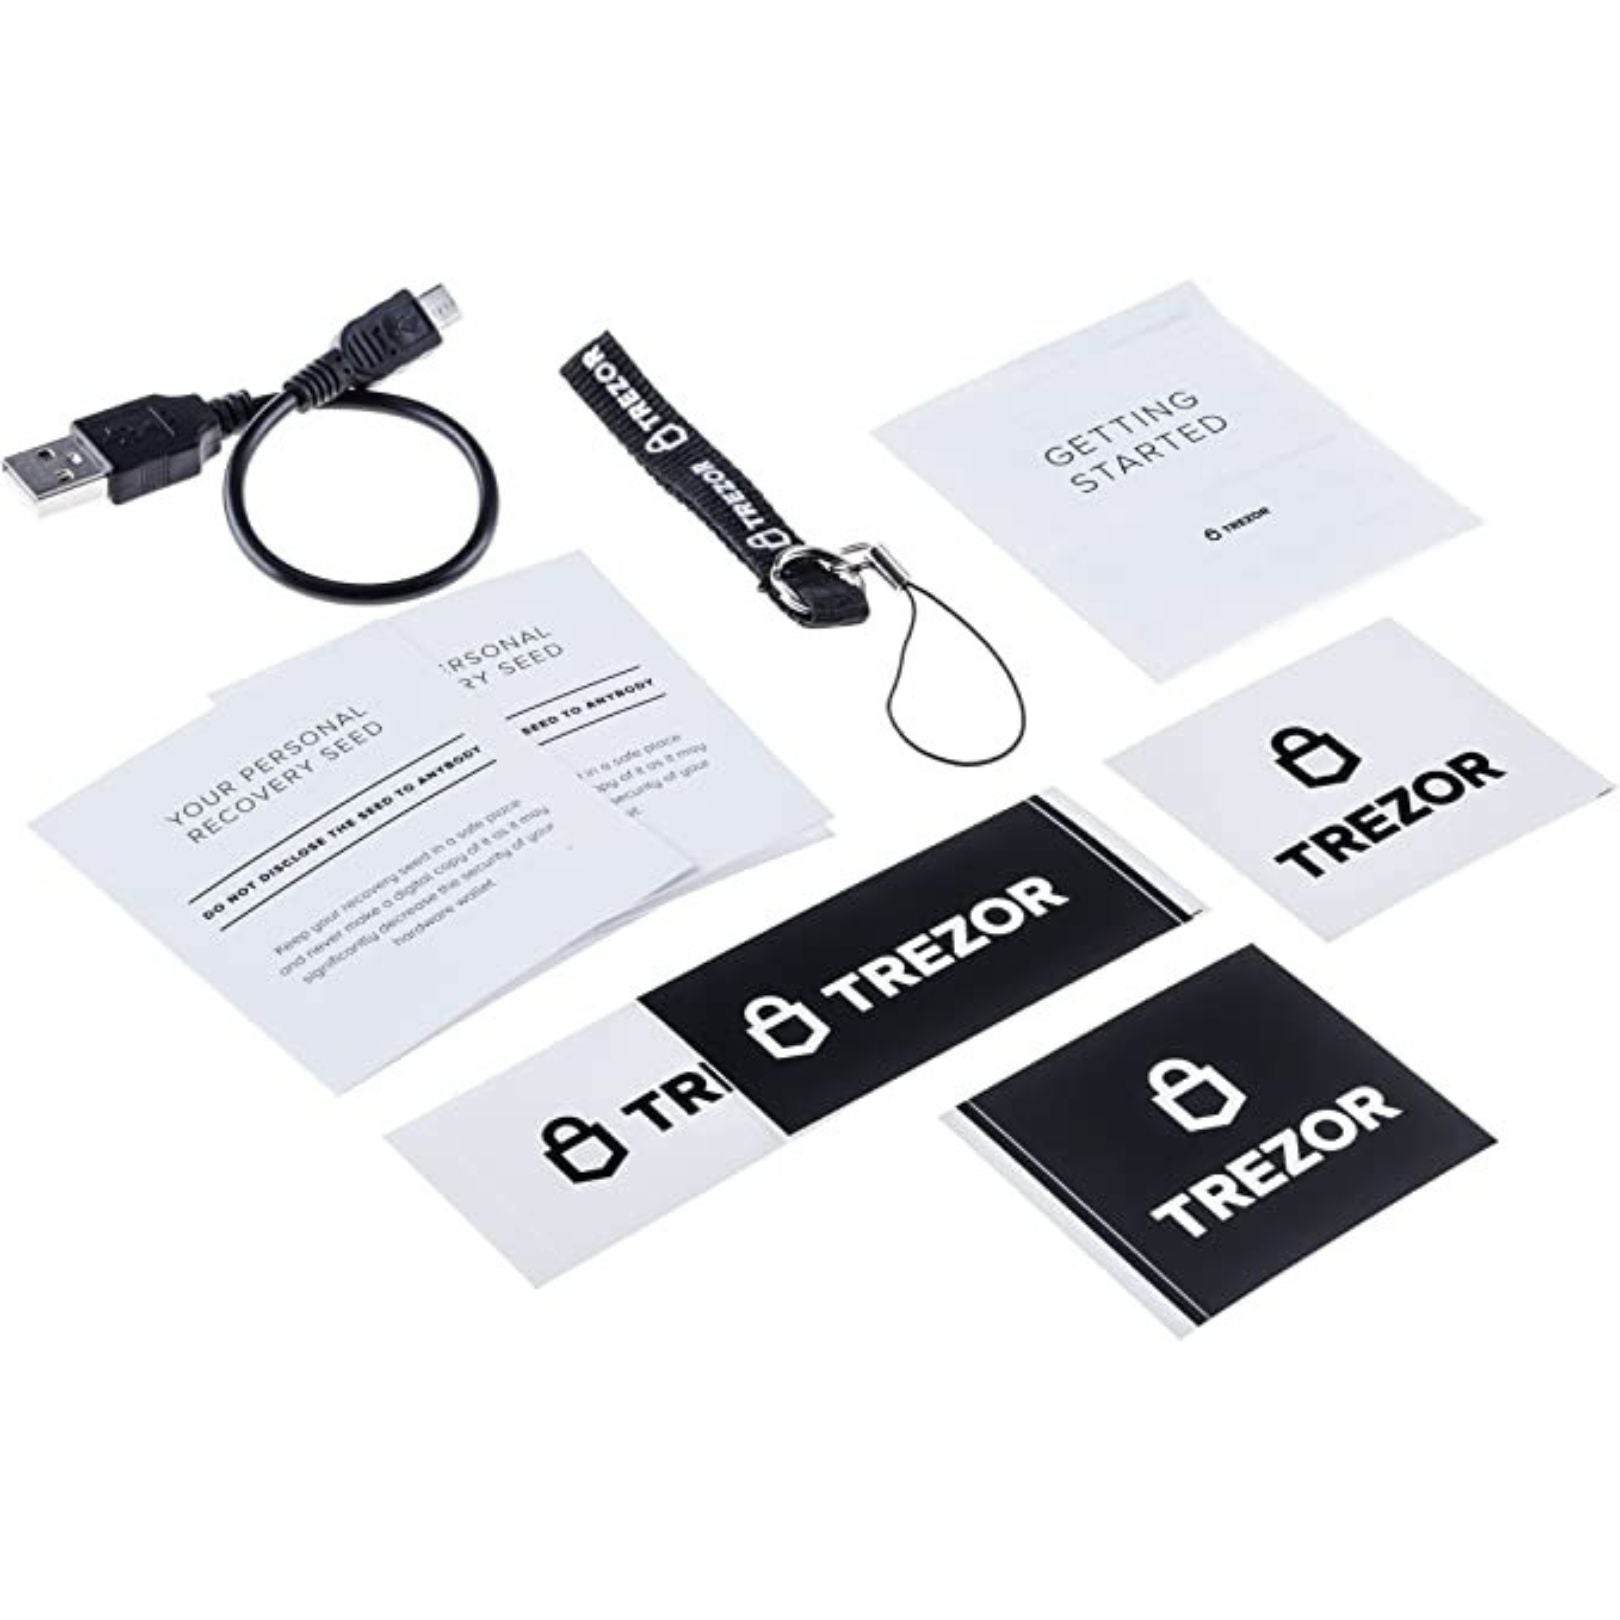 Unboxed Trezor Model One hardware wallet shown alongside its accompanying contents from the package.